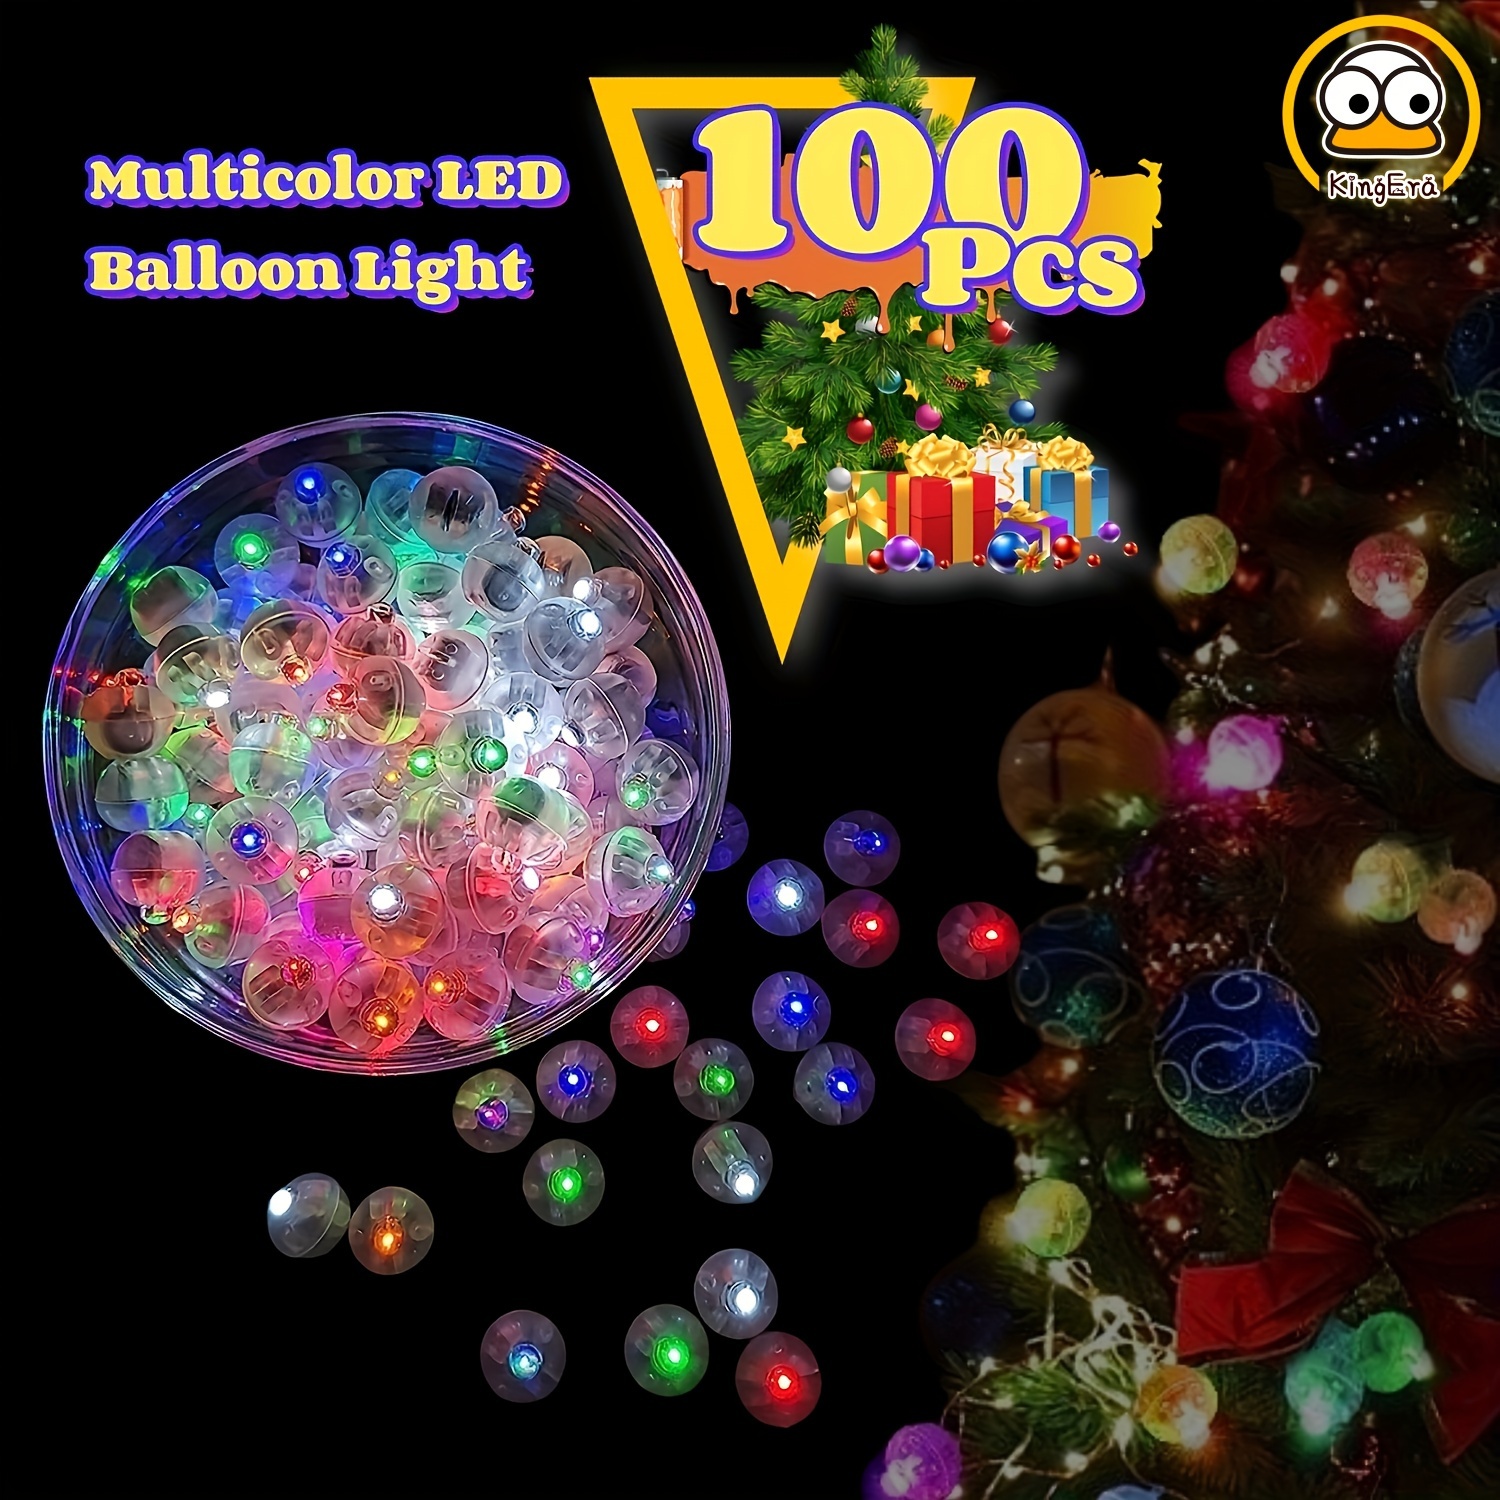 

100pcs Multicolor Led Balloon Light, Rainbow Colored Round Led Flash Mini Ball Light For Paper Lantern Balloon, Indoor Outdoor Party Event Fun Birthday Party Wedding Halloween Christmas Decorations